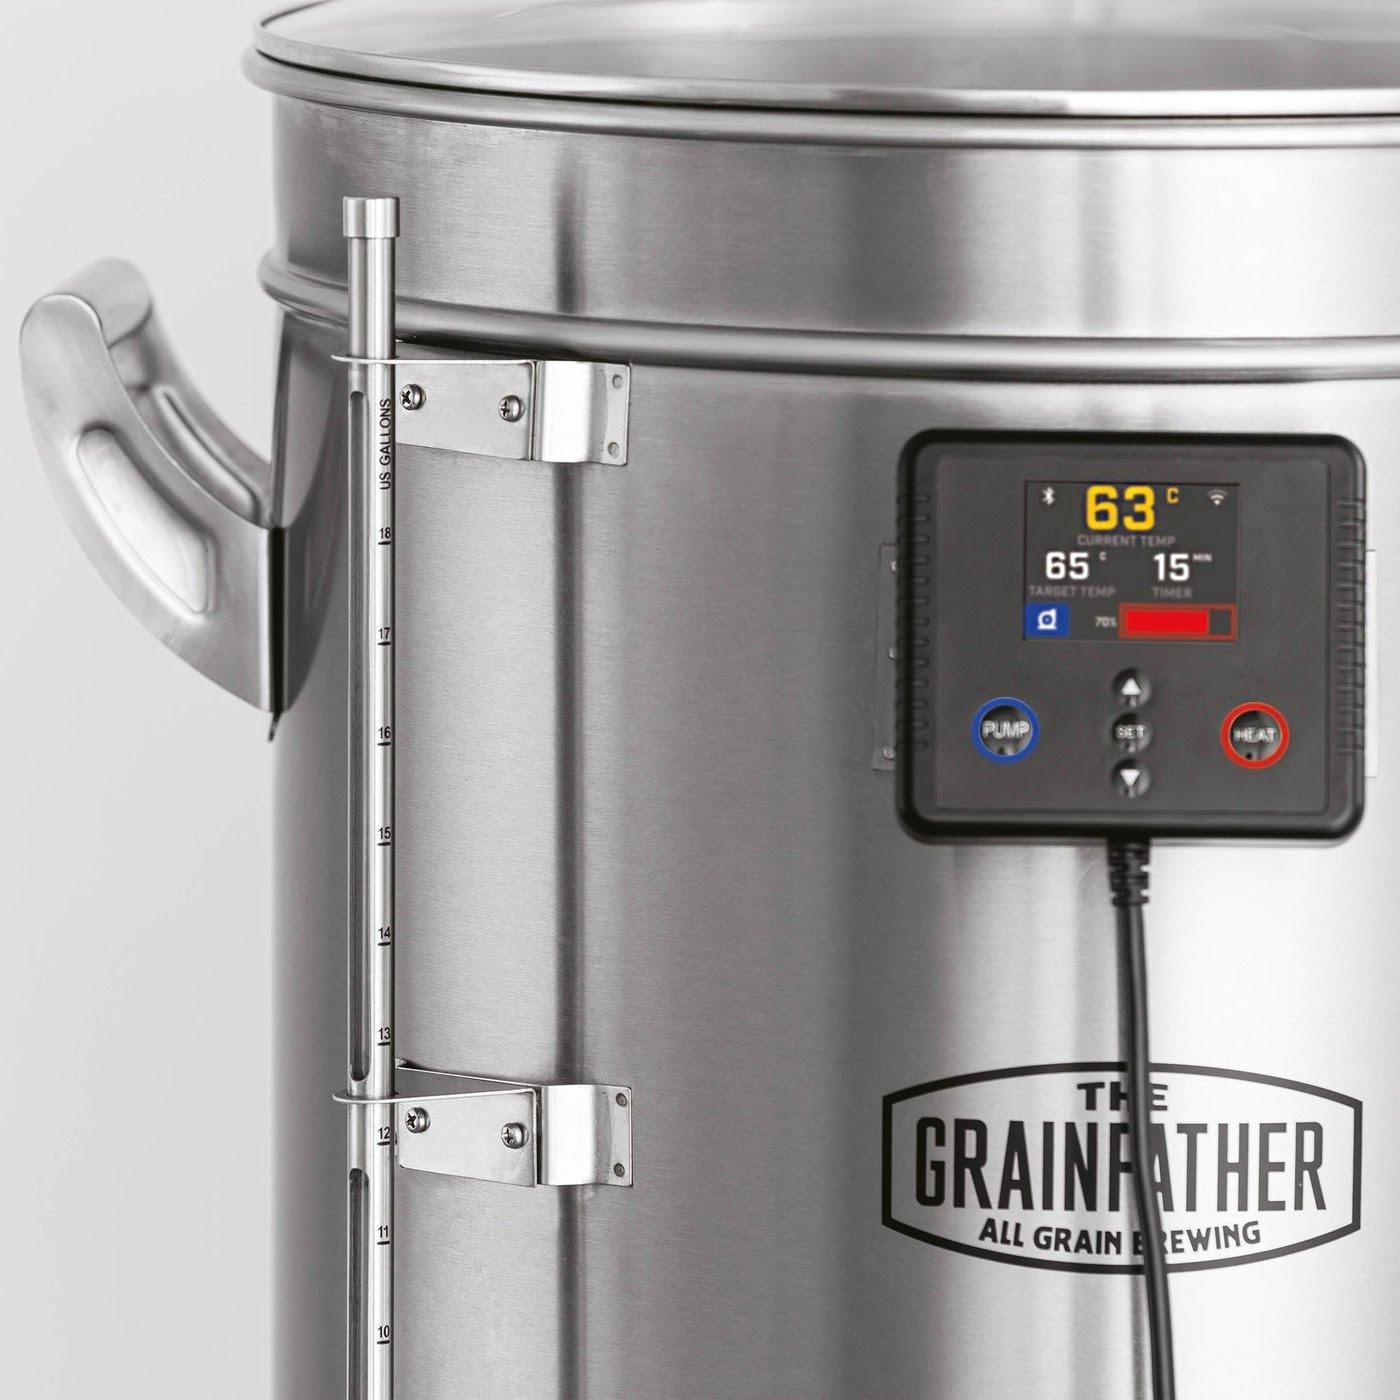 products-grainfather_g70_electric_brewing_system_unit_controller.jpeg